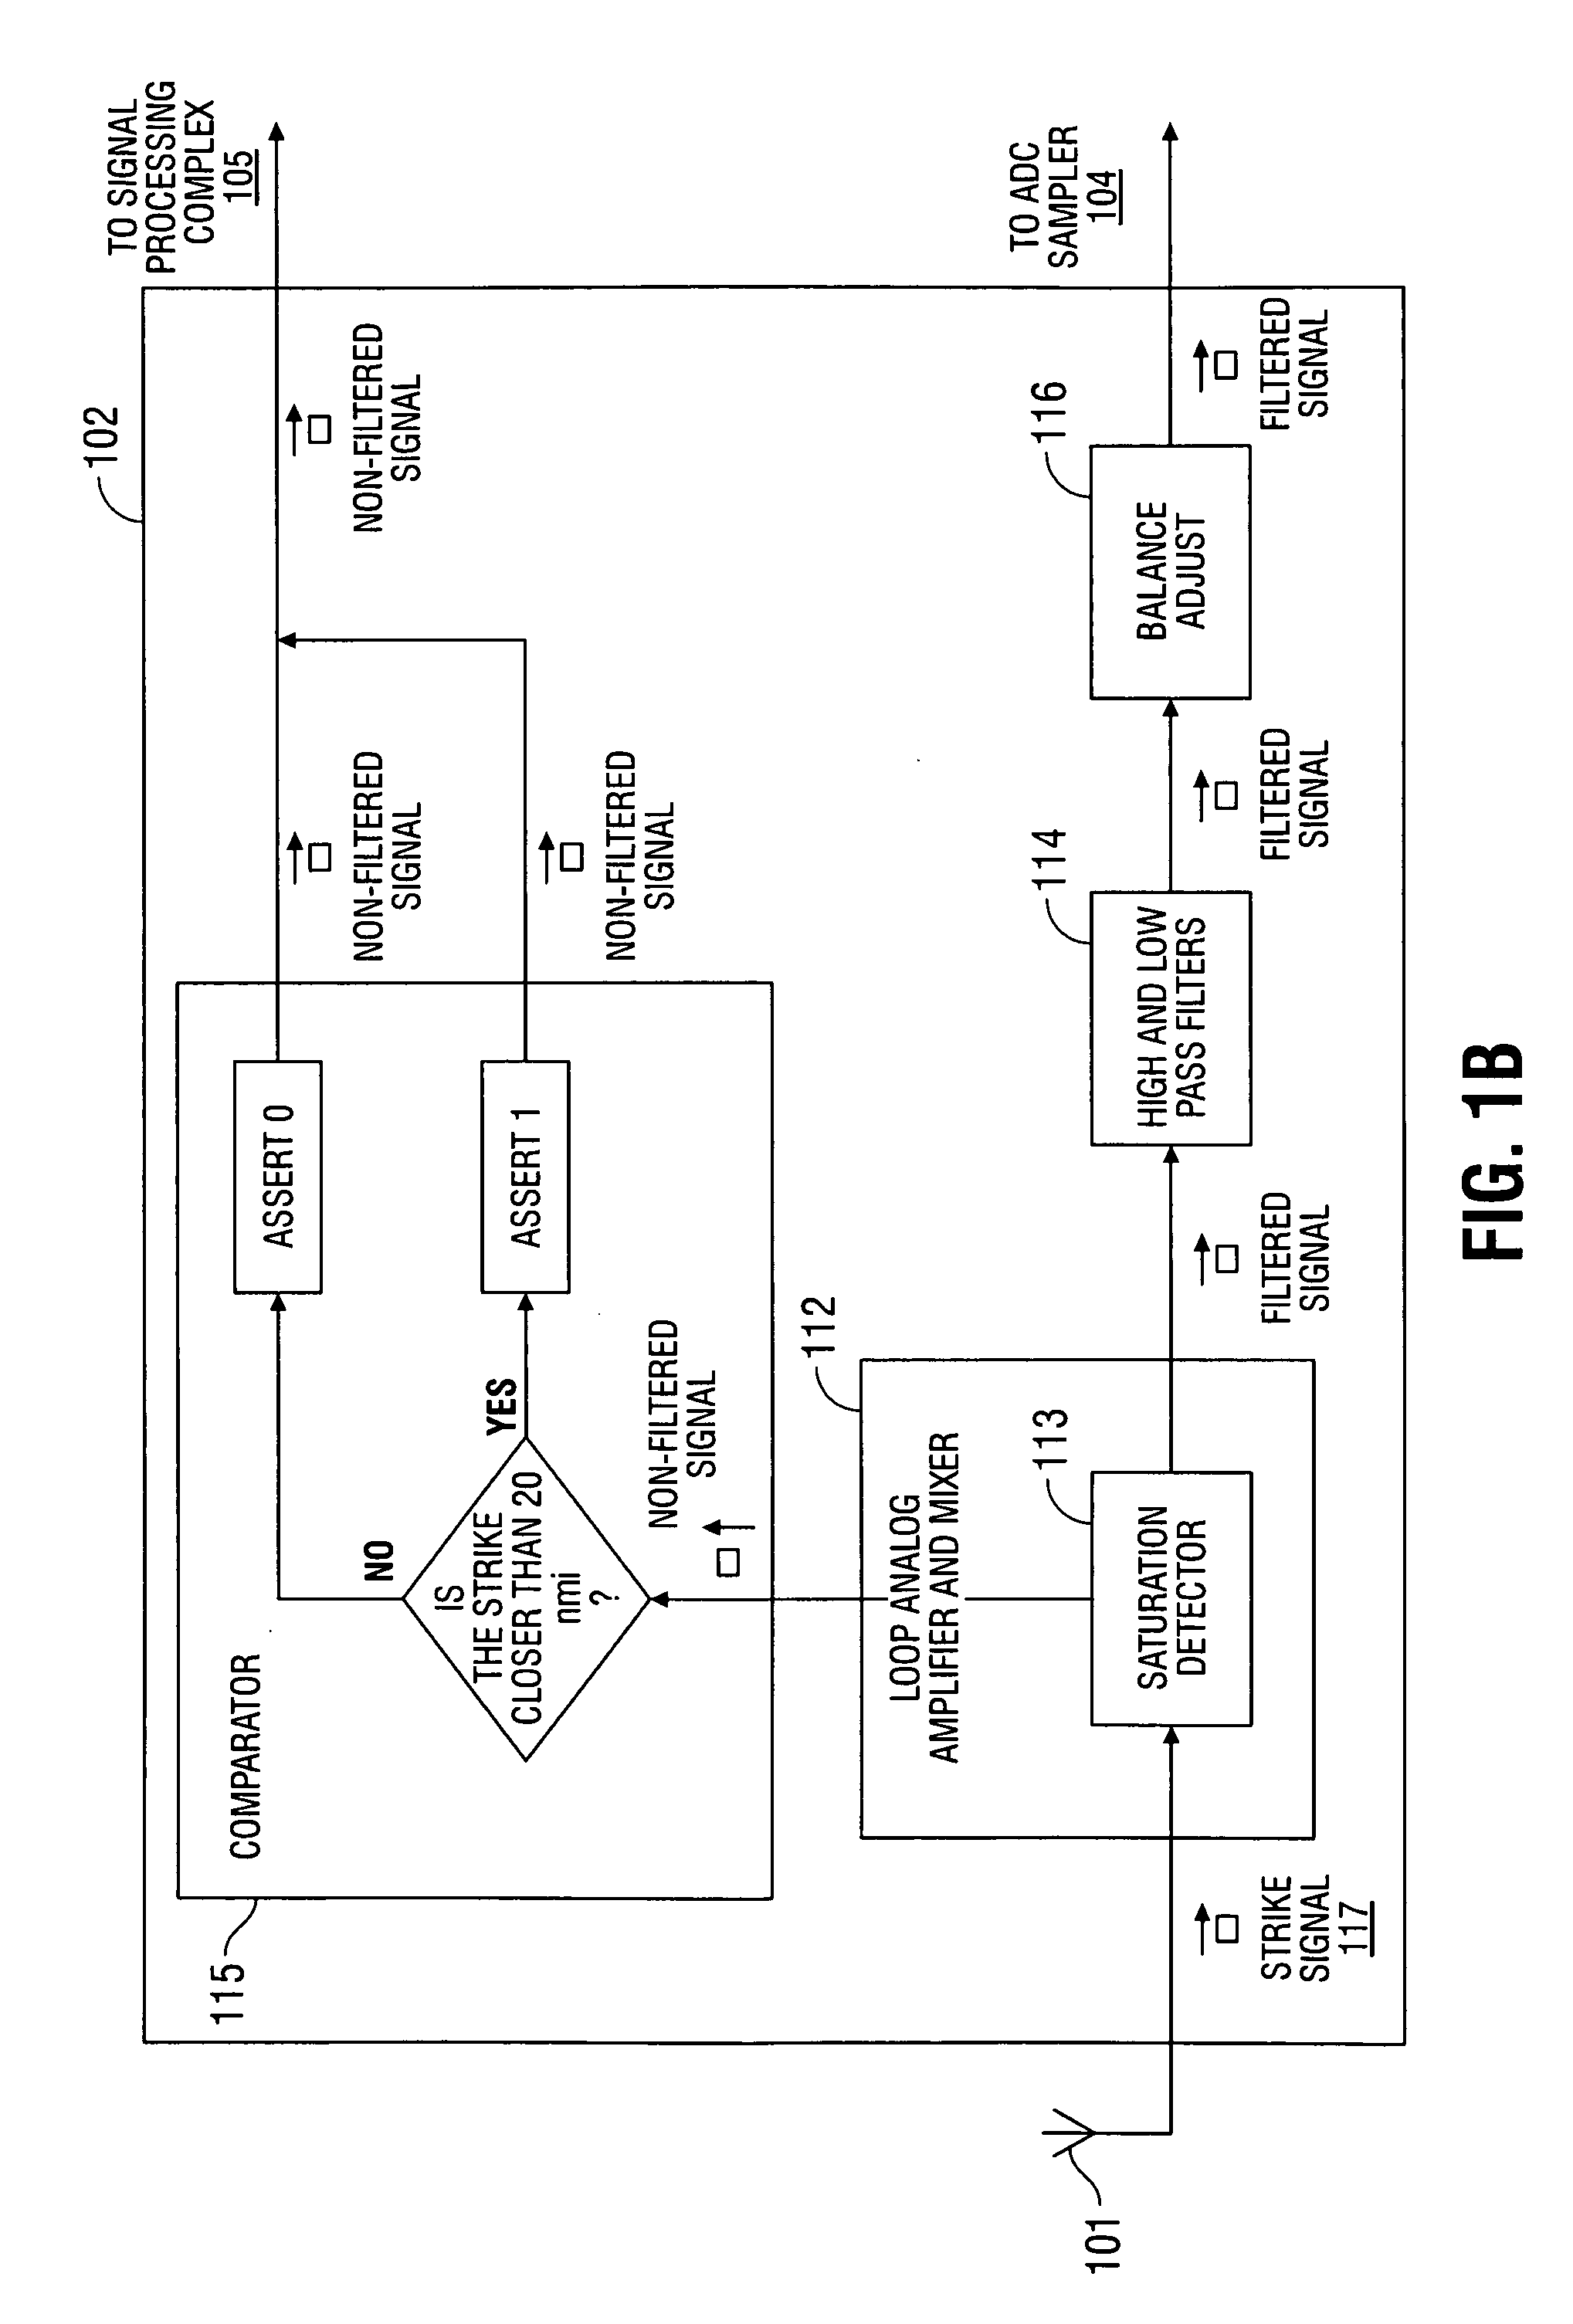 Ultra wideband receiver for lightning detection